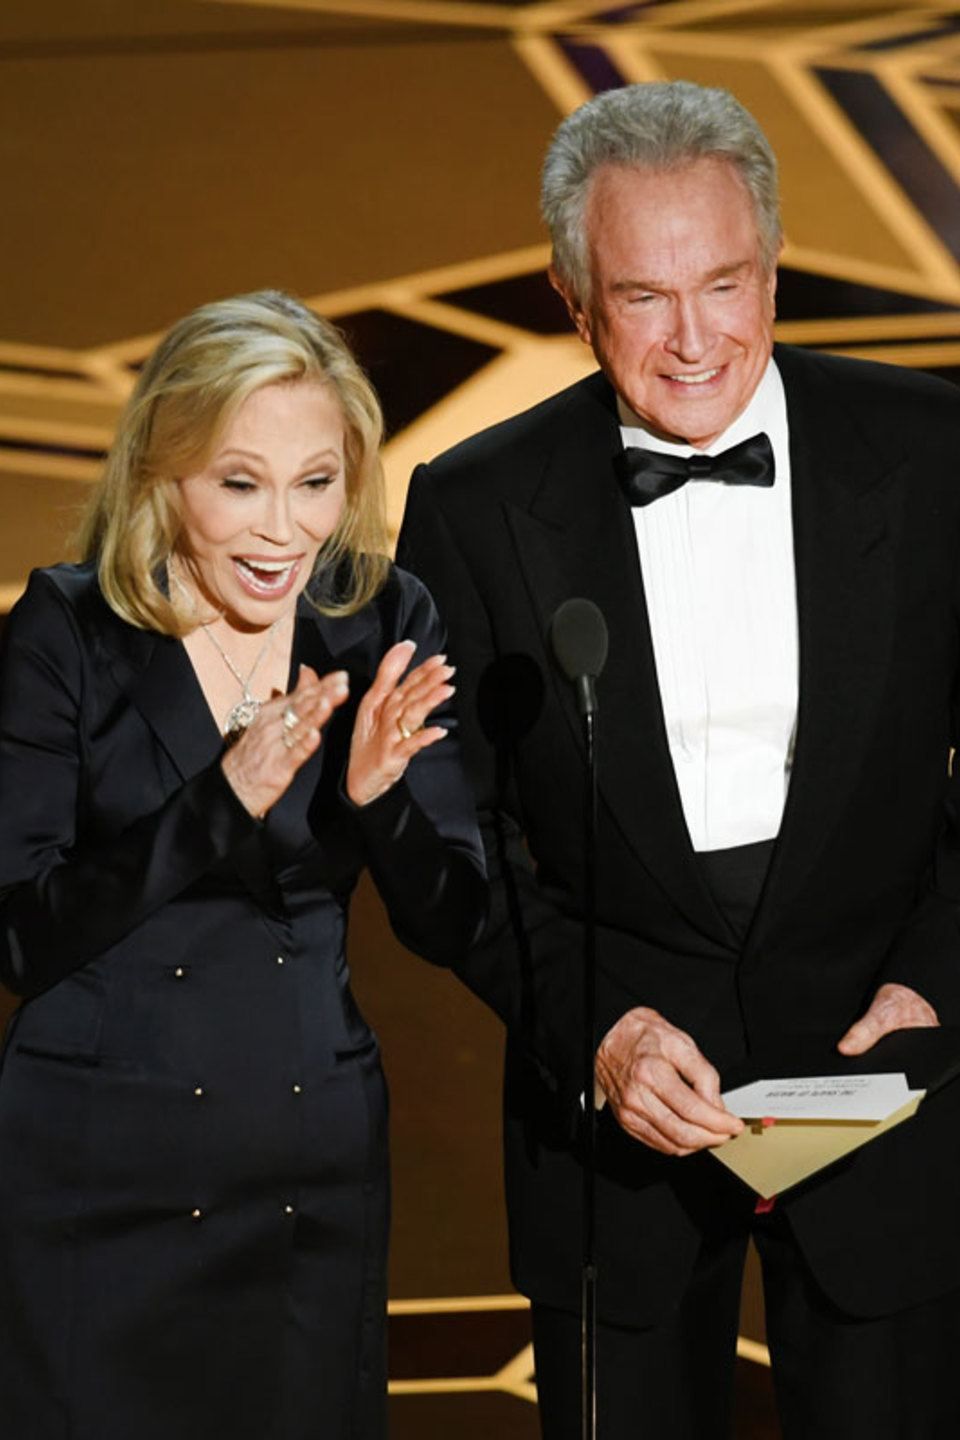 Actors Faye Dunaway (L) and Warren Beatty speak onstage during the 90th Annual Academy Awards at the Dolby Theatre at Hollywood & Highland Center on March 4, 2018 in Hollywood, California. (Photo by Kevin Winter/Getty Images)